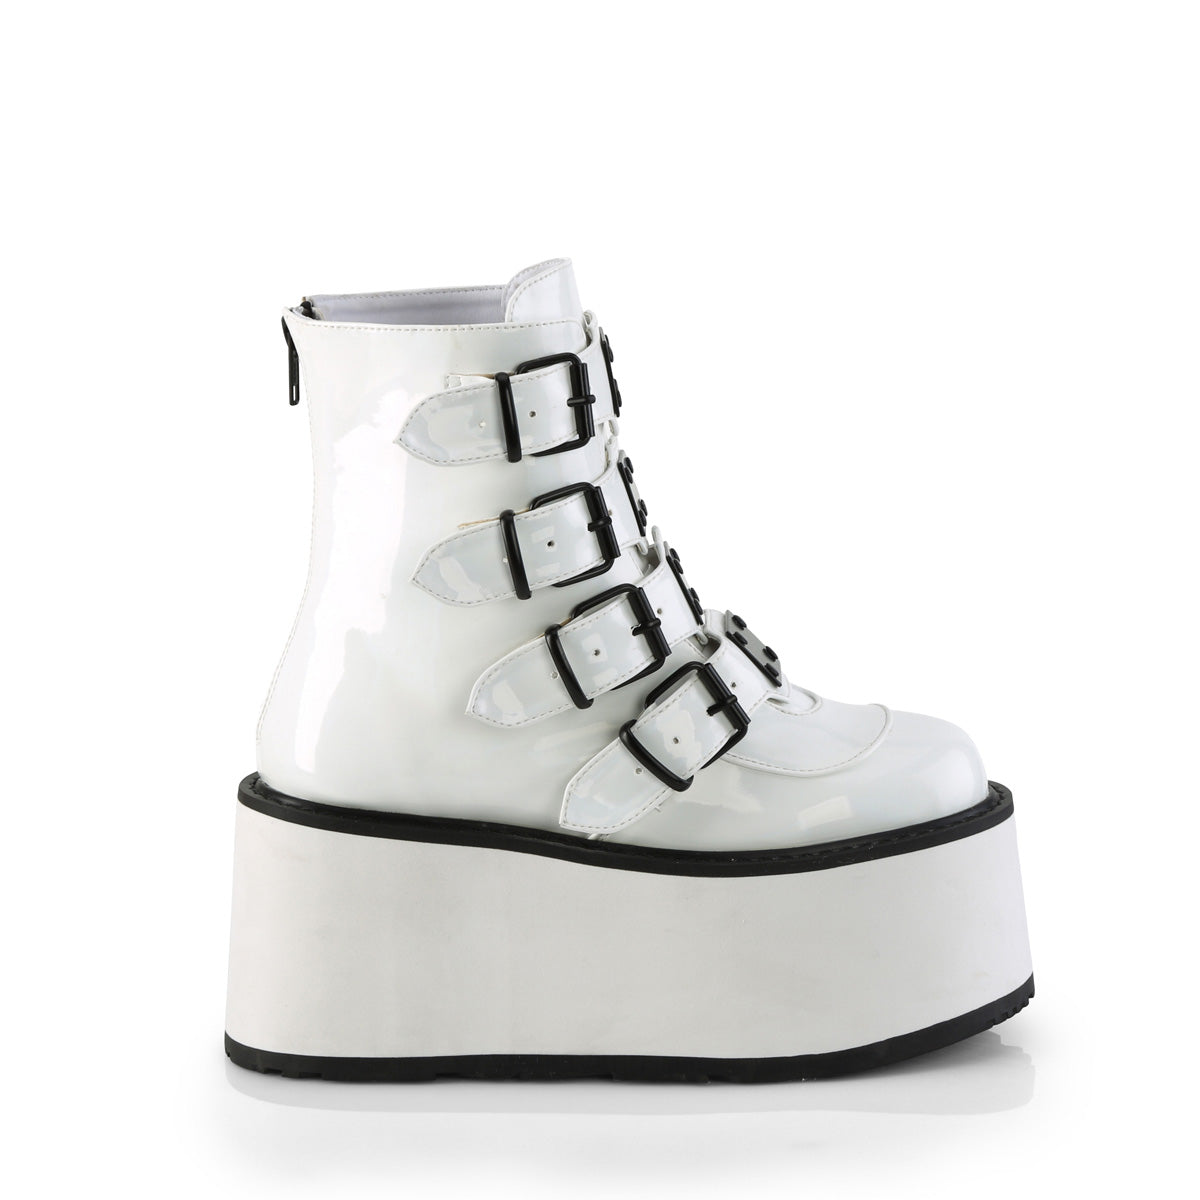 Demonia DAMNED-105 | White Holographic Patent Ankle Boots